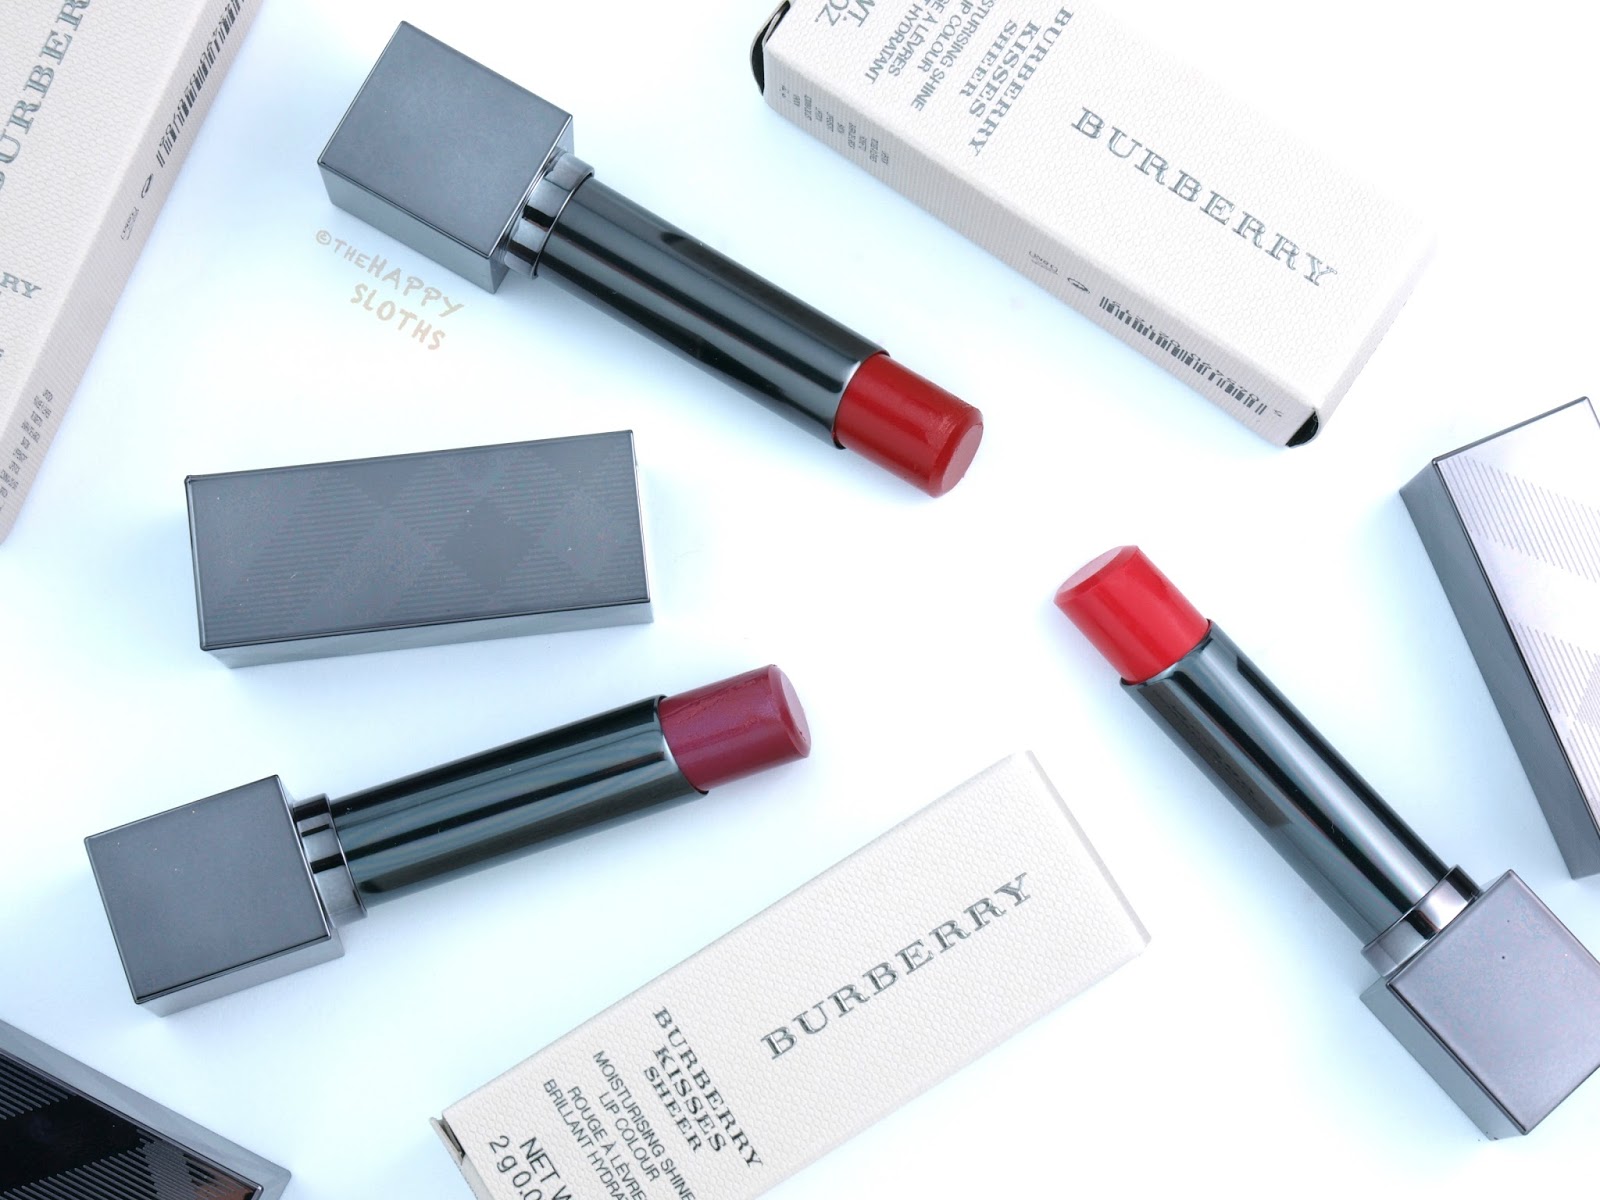 Burberry Kisses Sheer Lipstick in "No. 289 Boysenberry", "No. 241 Crimson Pink" & "No. 309 Poppy Red": Review and Swatches | The Happy Sloths: Beauty, Makeup, and Skincare Blog with Reviews Swatches